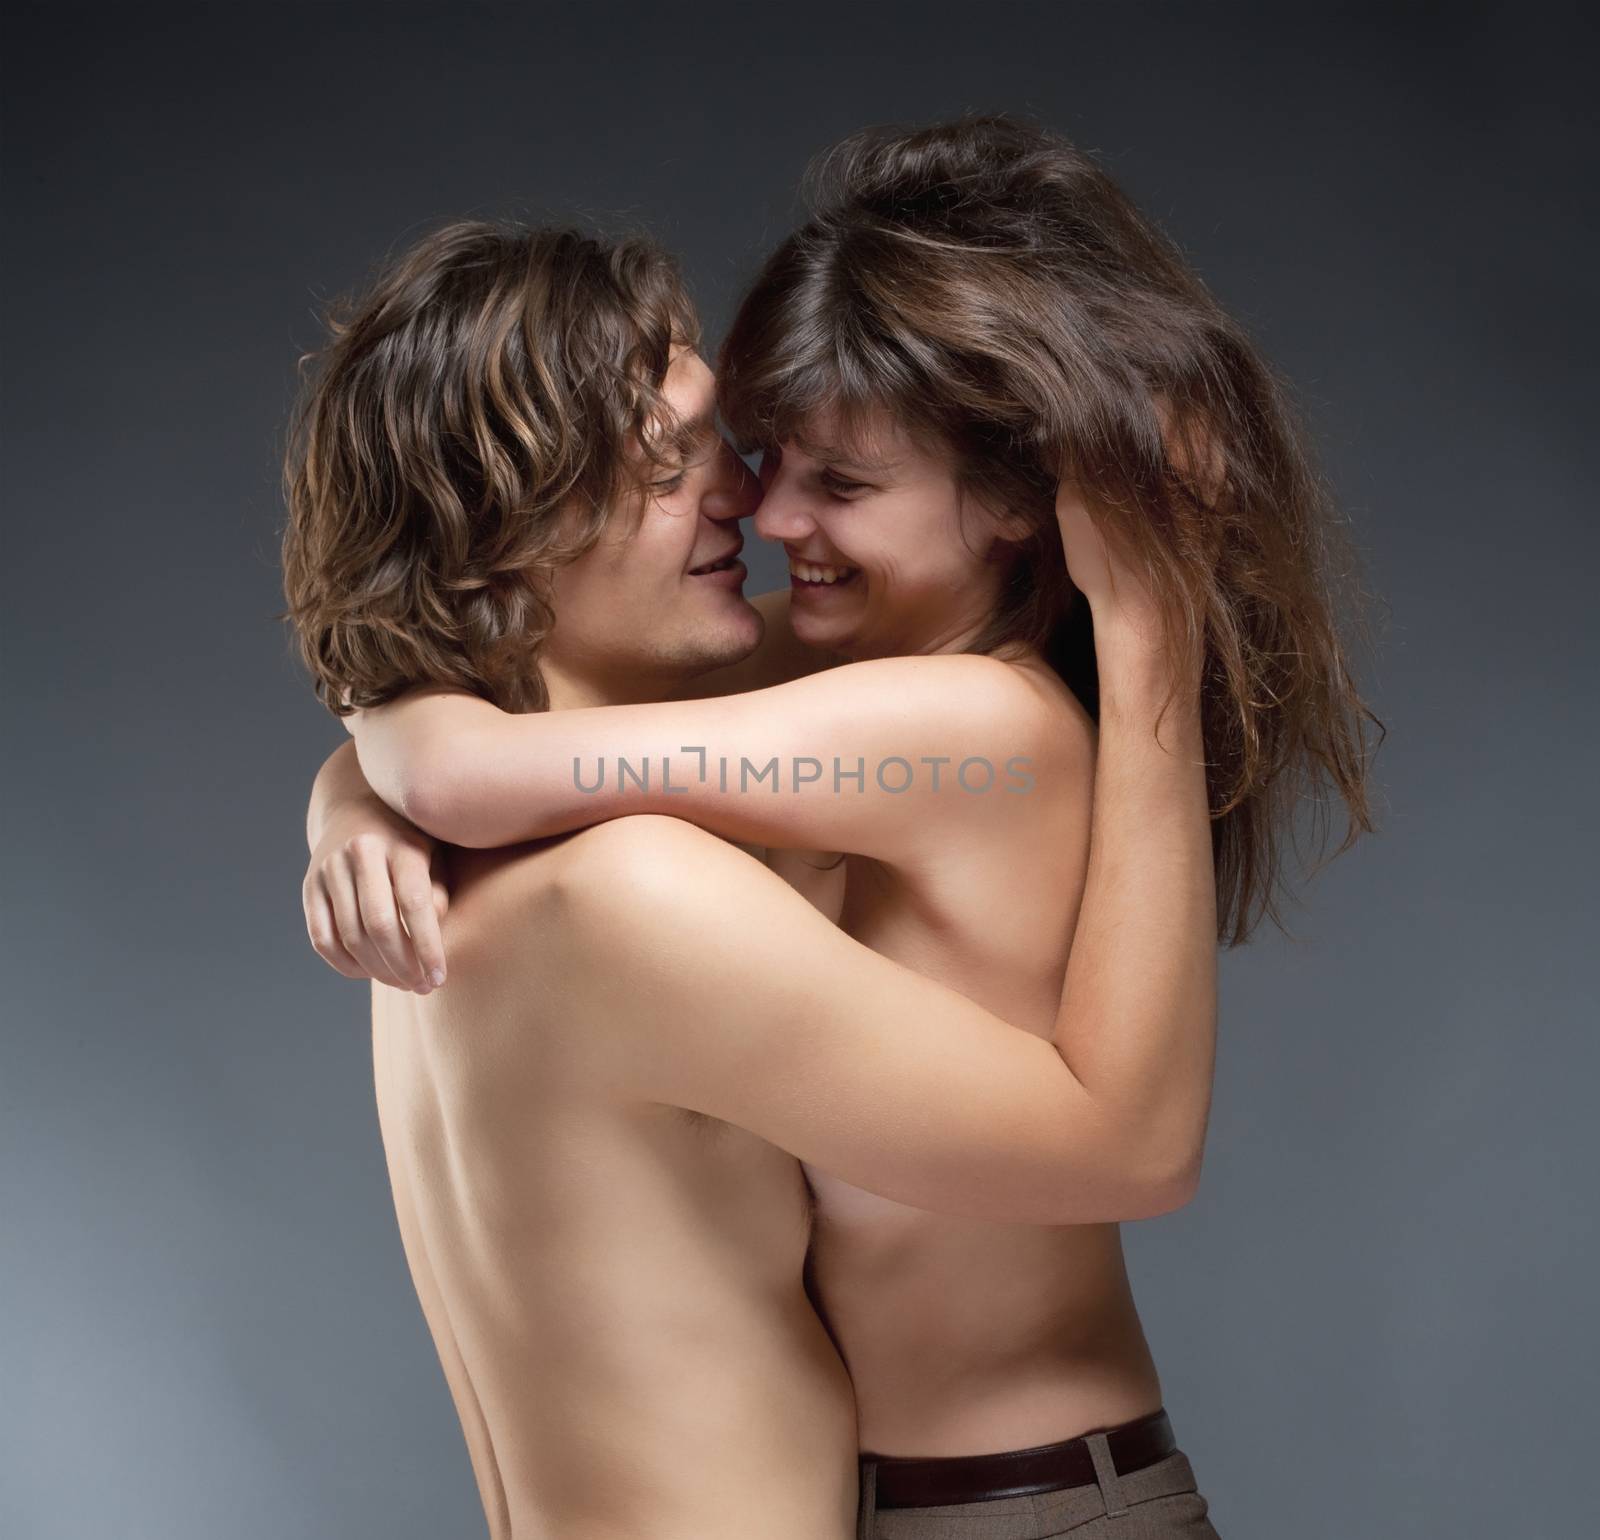 Portrait of a Young Romantic Couple Embracing, Smiling